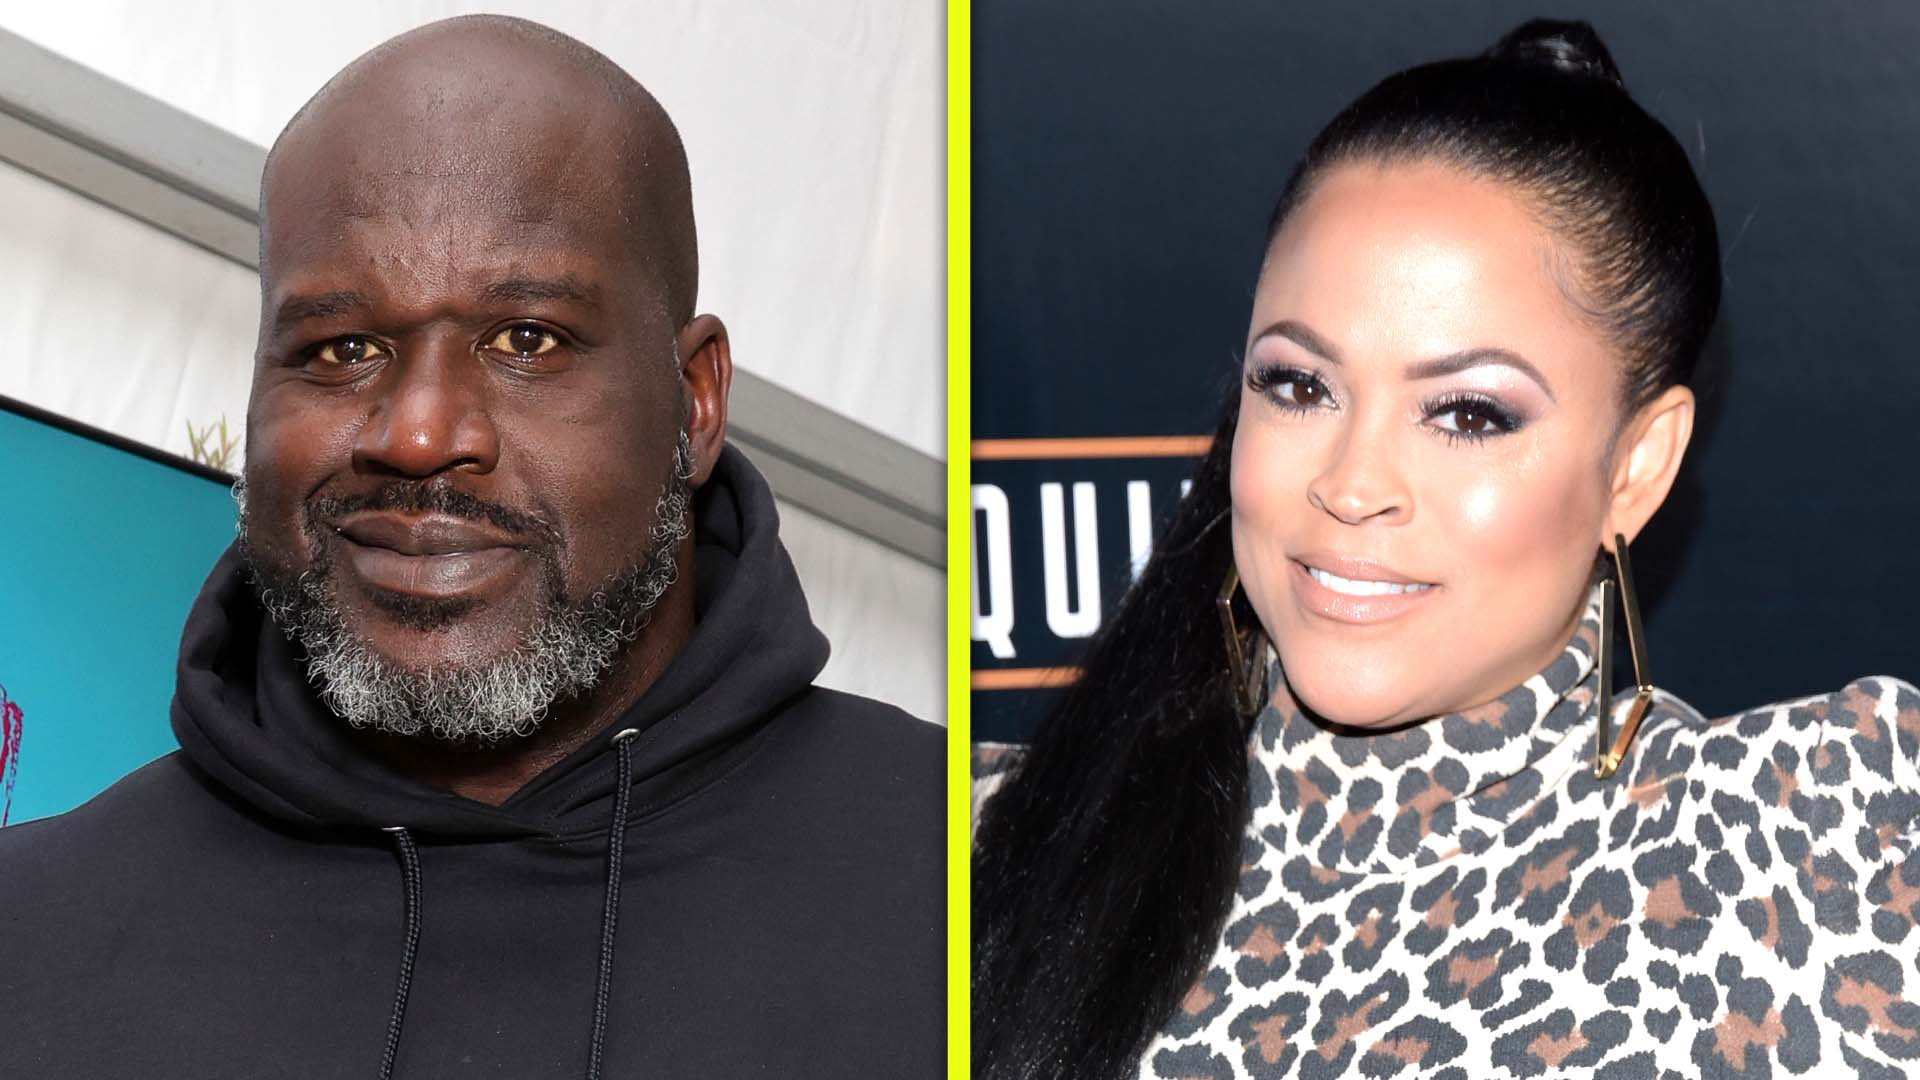 Shaquille O'Neal Reacts to Ex-Wife Questioning If She Ever Loved Him